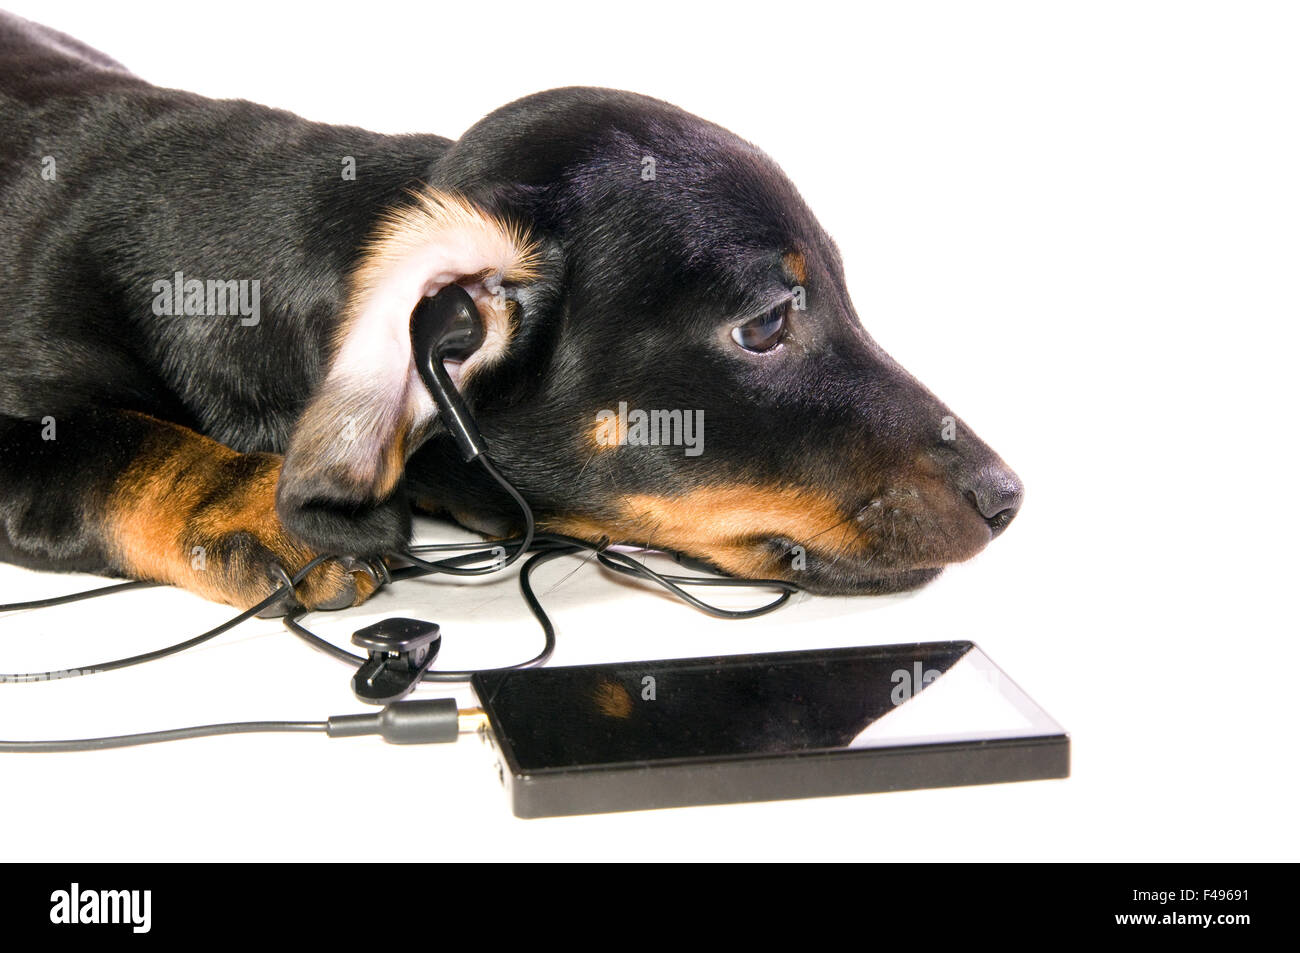 Dog with a mp3 player Stock Photo